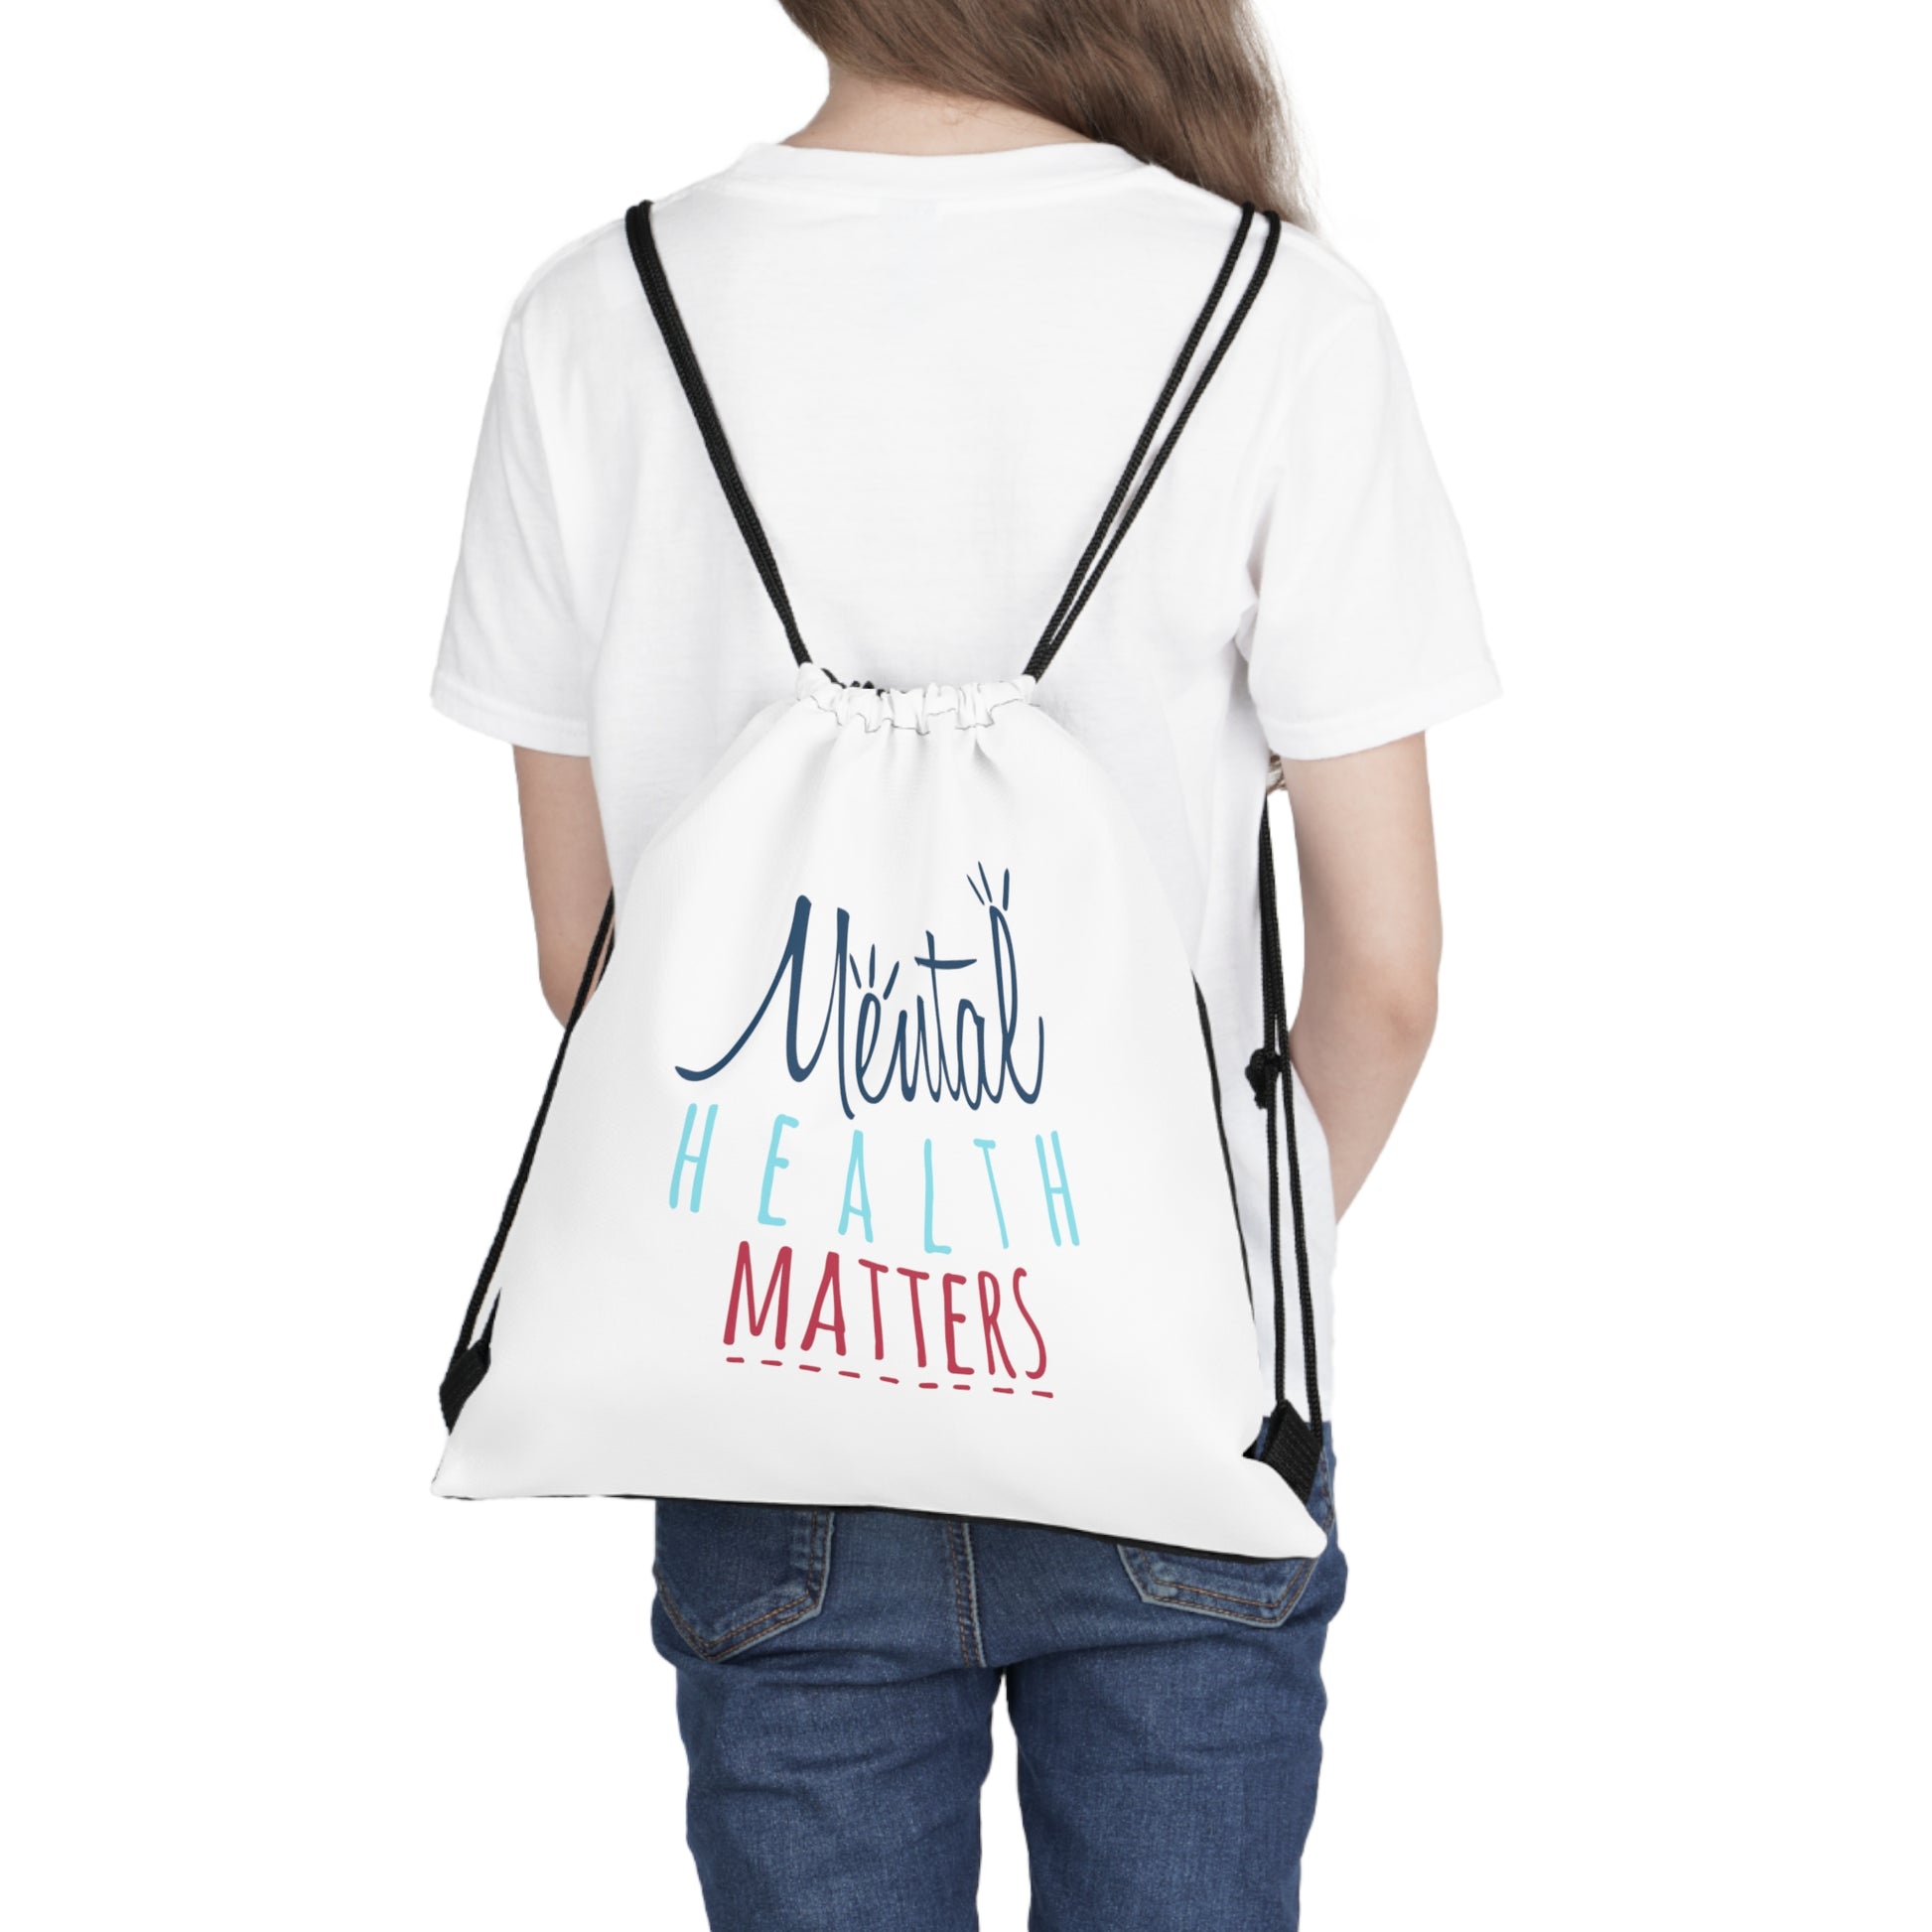 "Mental Health Matters" Drawstring Bag - Weave Got Gifts - Unique Gifts You Won’t Find Anywhere Else!